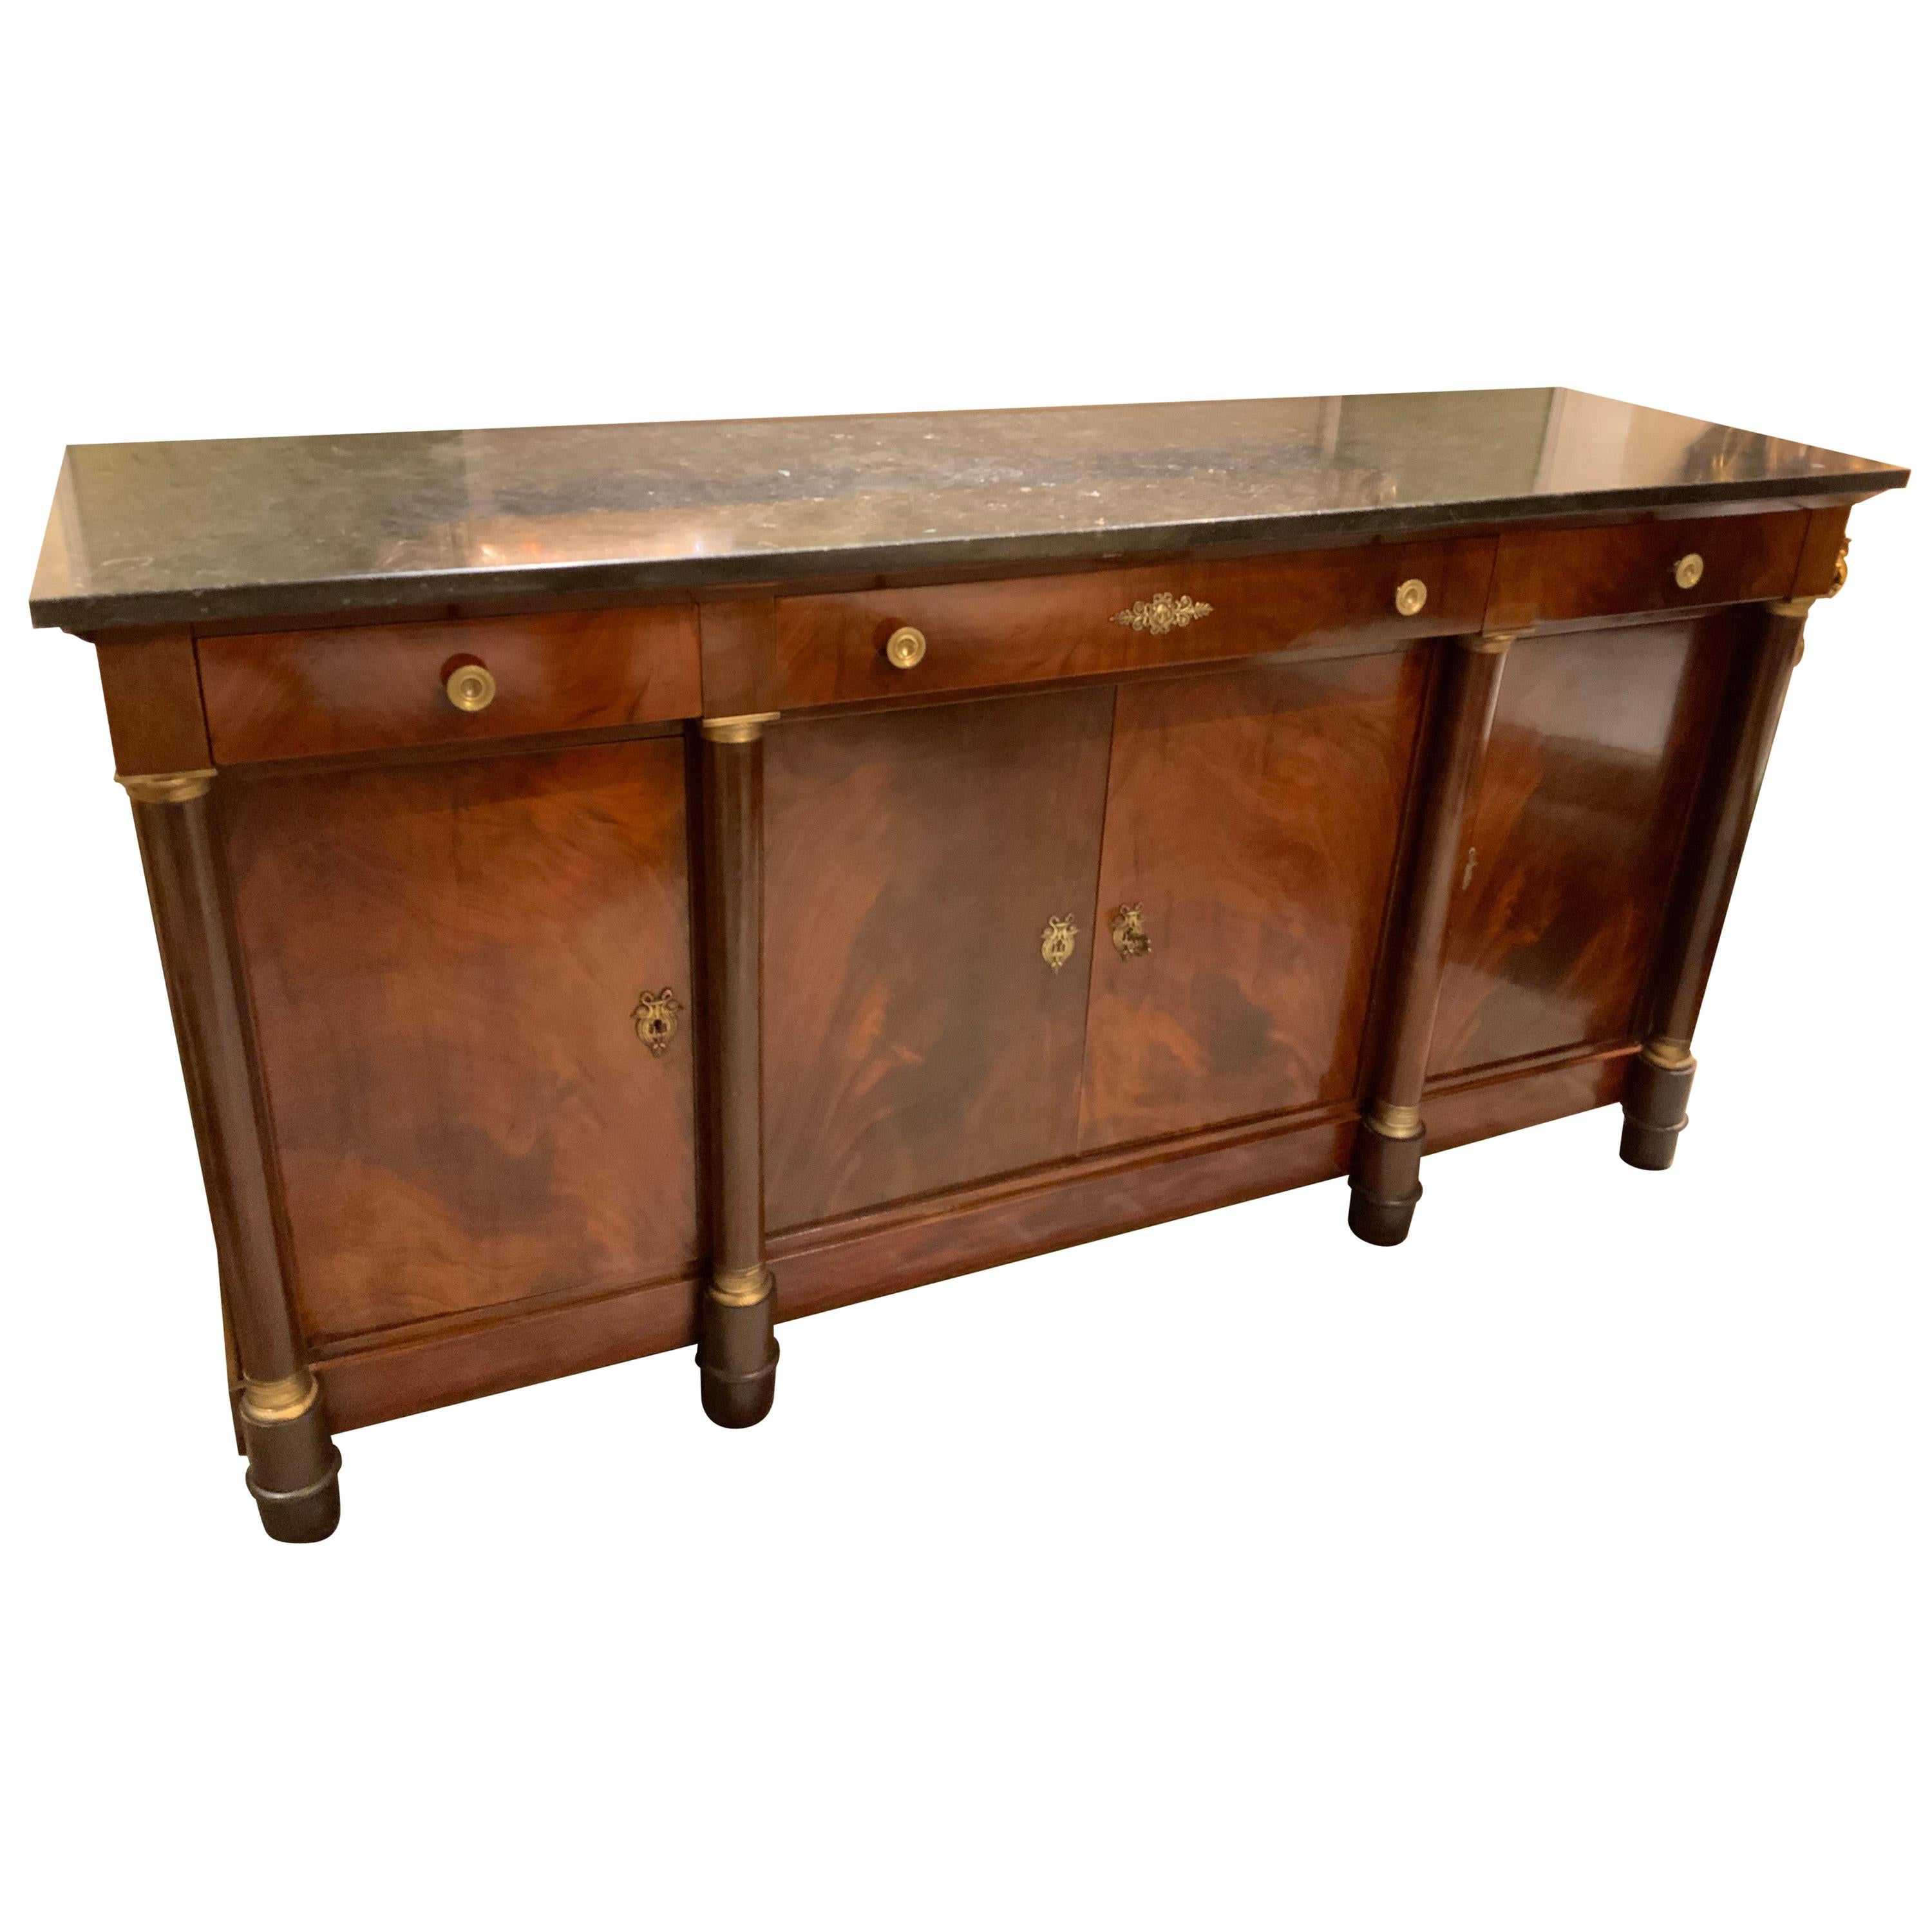 French Empire Style Marble-Top Mahogany Sideboard/Buffet